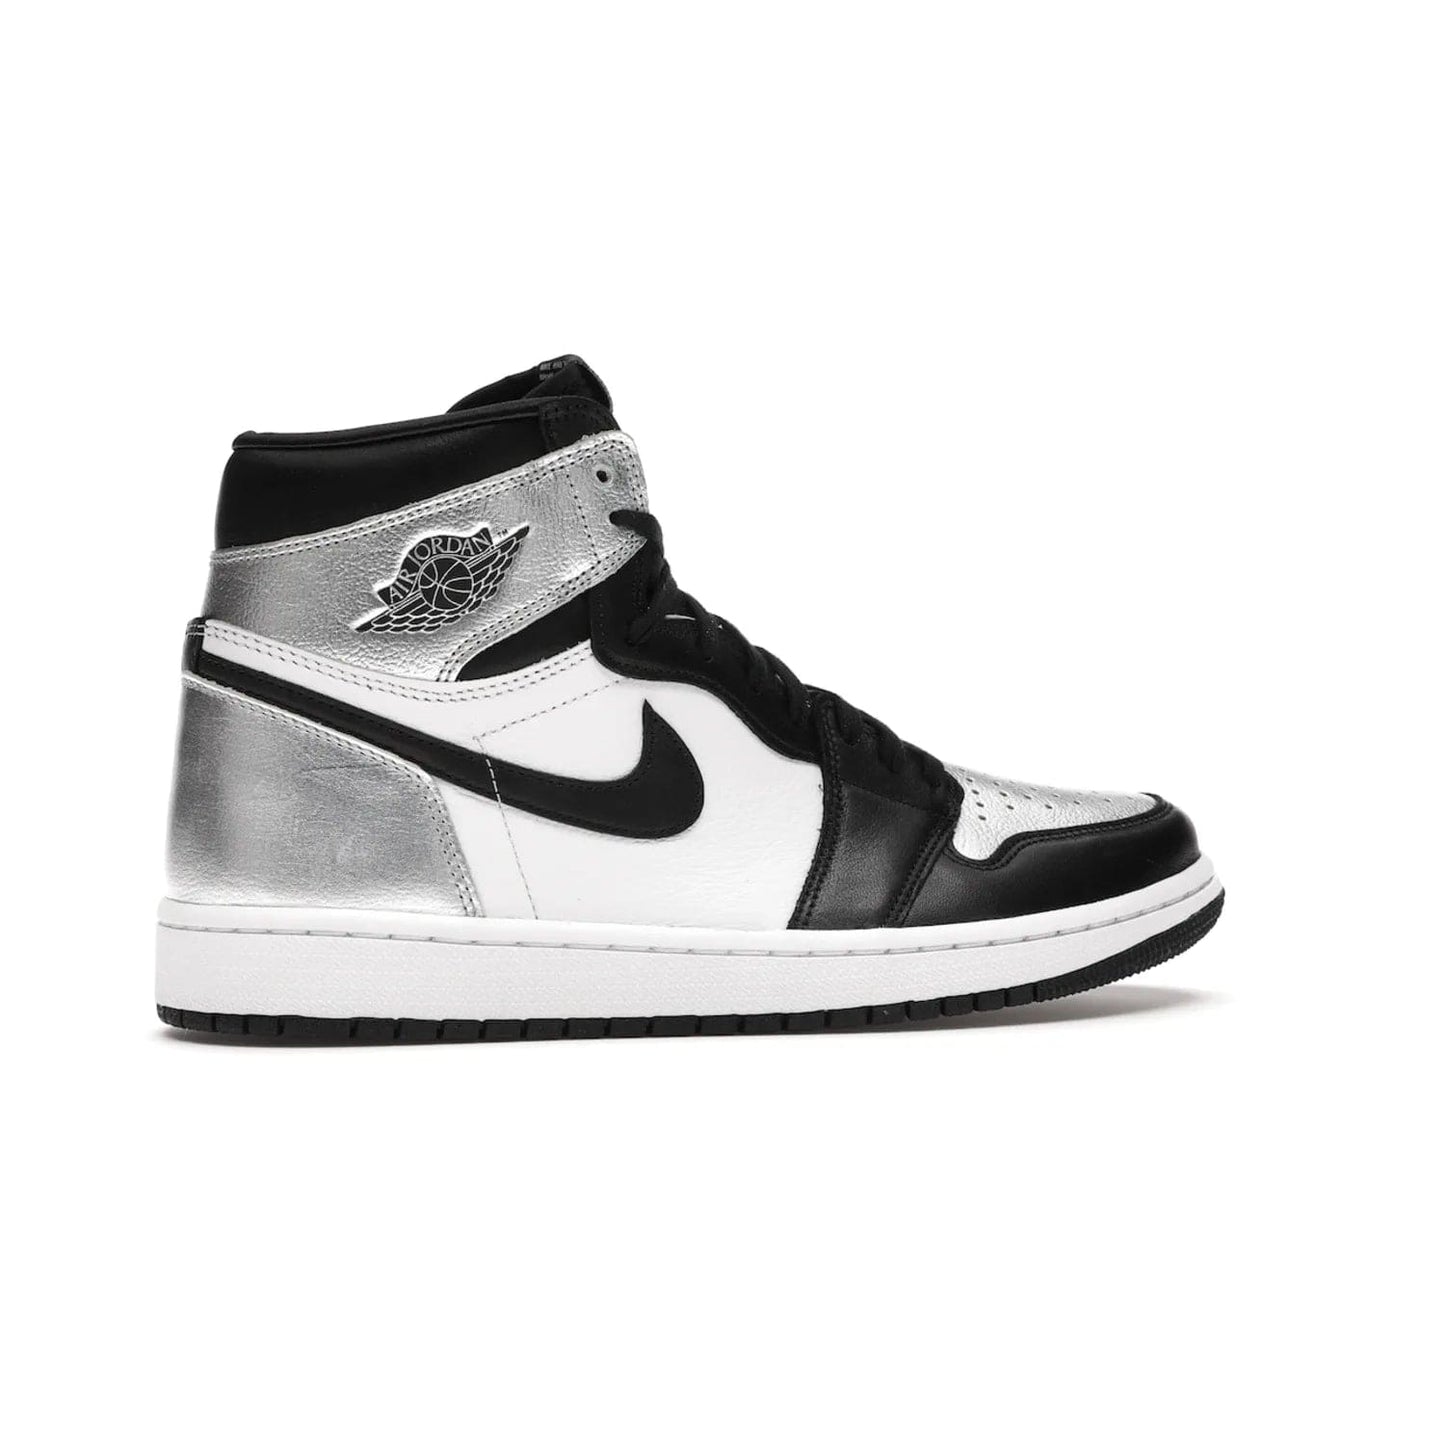 Jordan 1 Retro High Silver Toe (Women's) - Image 35 - Only at www.BallersClubKickz.com - Introducing the Jordan 1 Retro High Silver Toe (Women's): an updated spin on the iconic 'Black Toe' theme. Featuring white & black leather and silver patent leather construction. Nike Air branding, Air Jordan Wings logo, and white/black sole finish give a classic look. The perfect addition to an on-trend streetwear look. Available in classic black & white, this Jordan 1 is an instant classic. Released in February 20